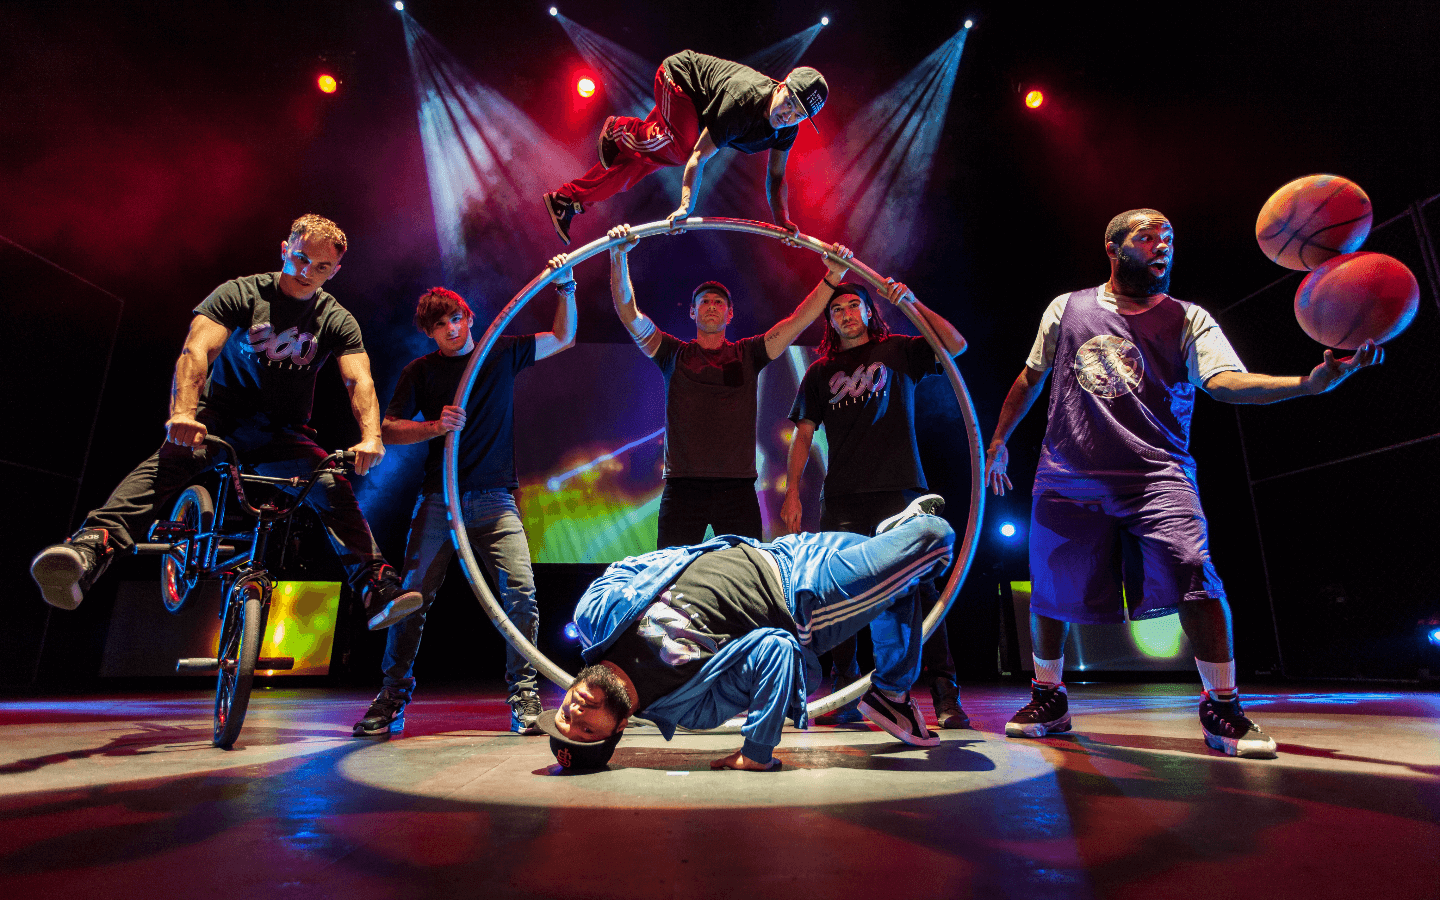 A group of people on a stage performing on a hoop.